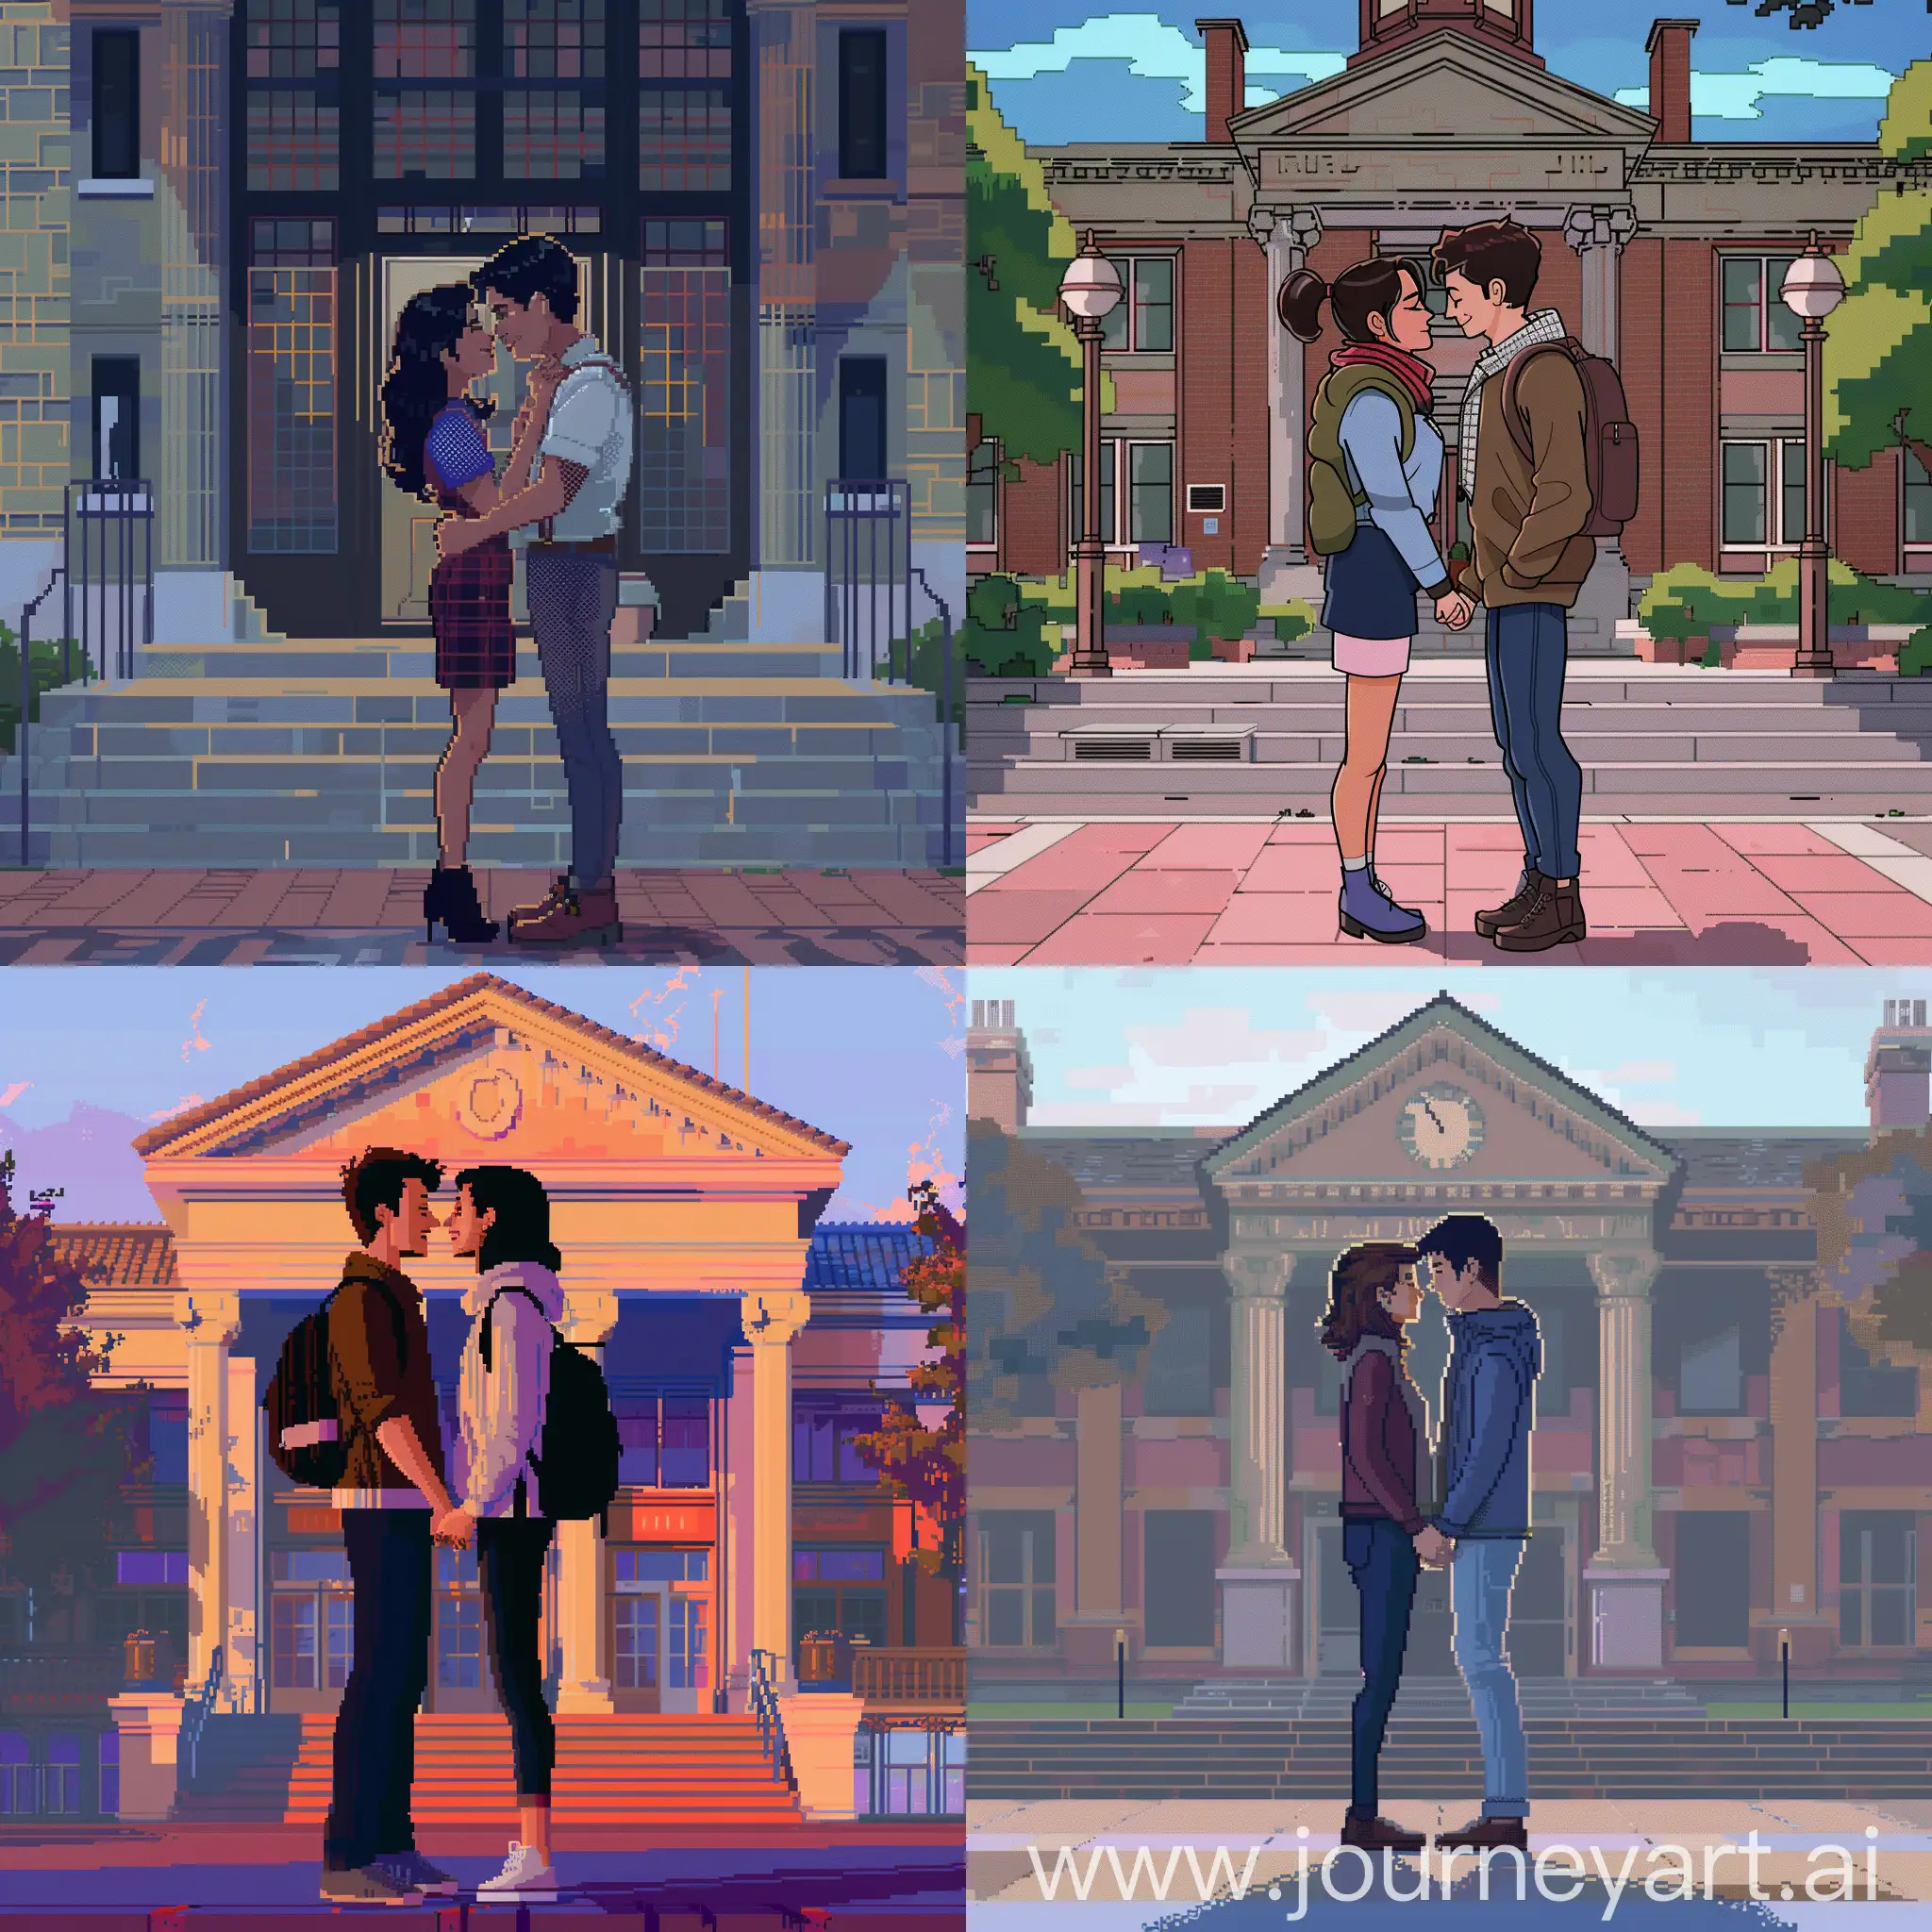 Aesthetic-Couple-Dating-in-Front-of-Institution-Pixelated-Retro-Style